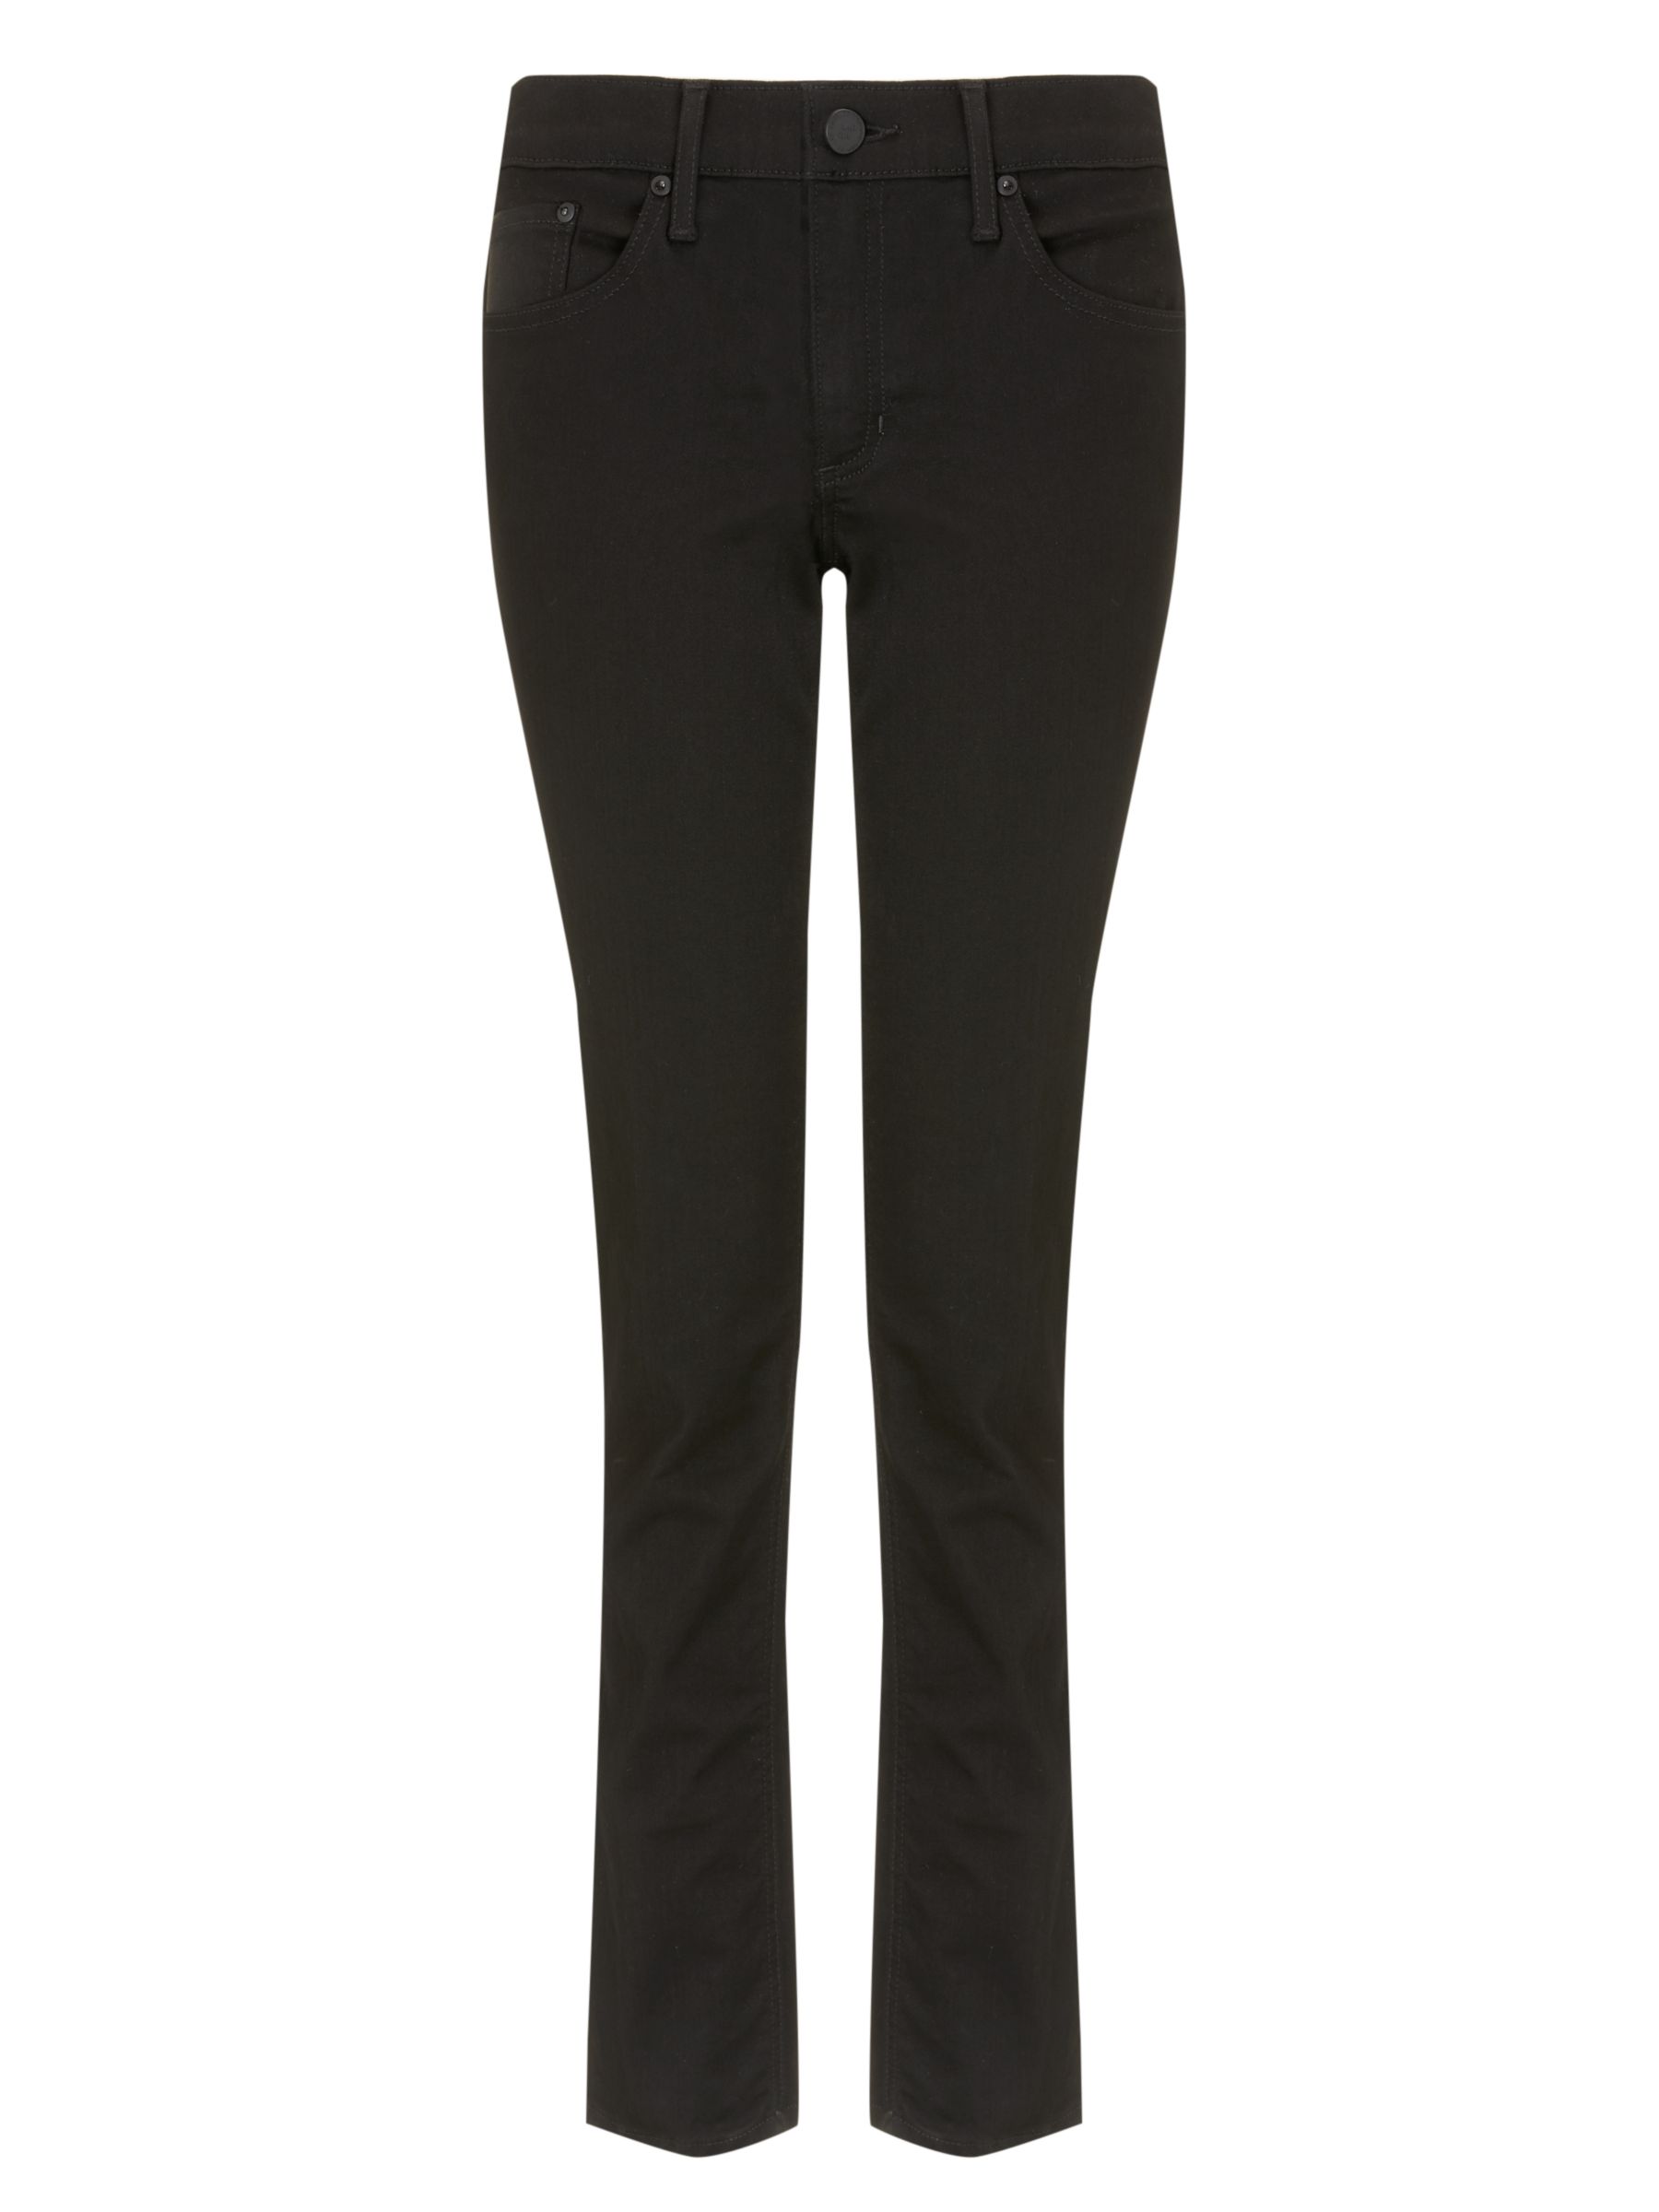 AND/OR Silverlake Straight Leg Jeans, Black at John Lewis